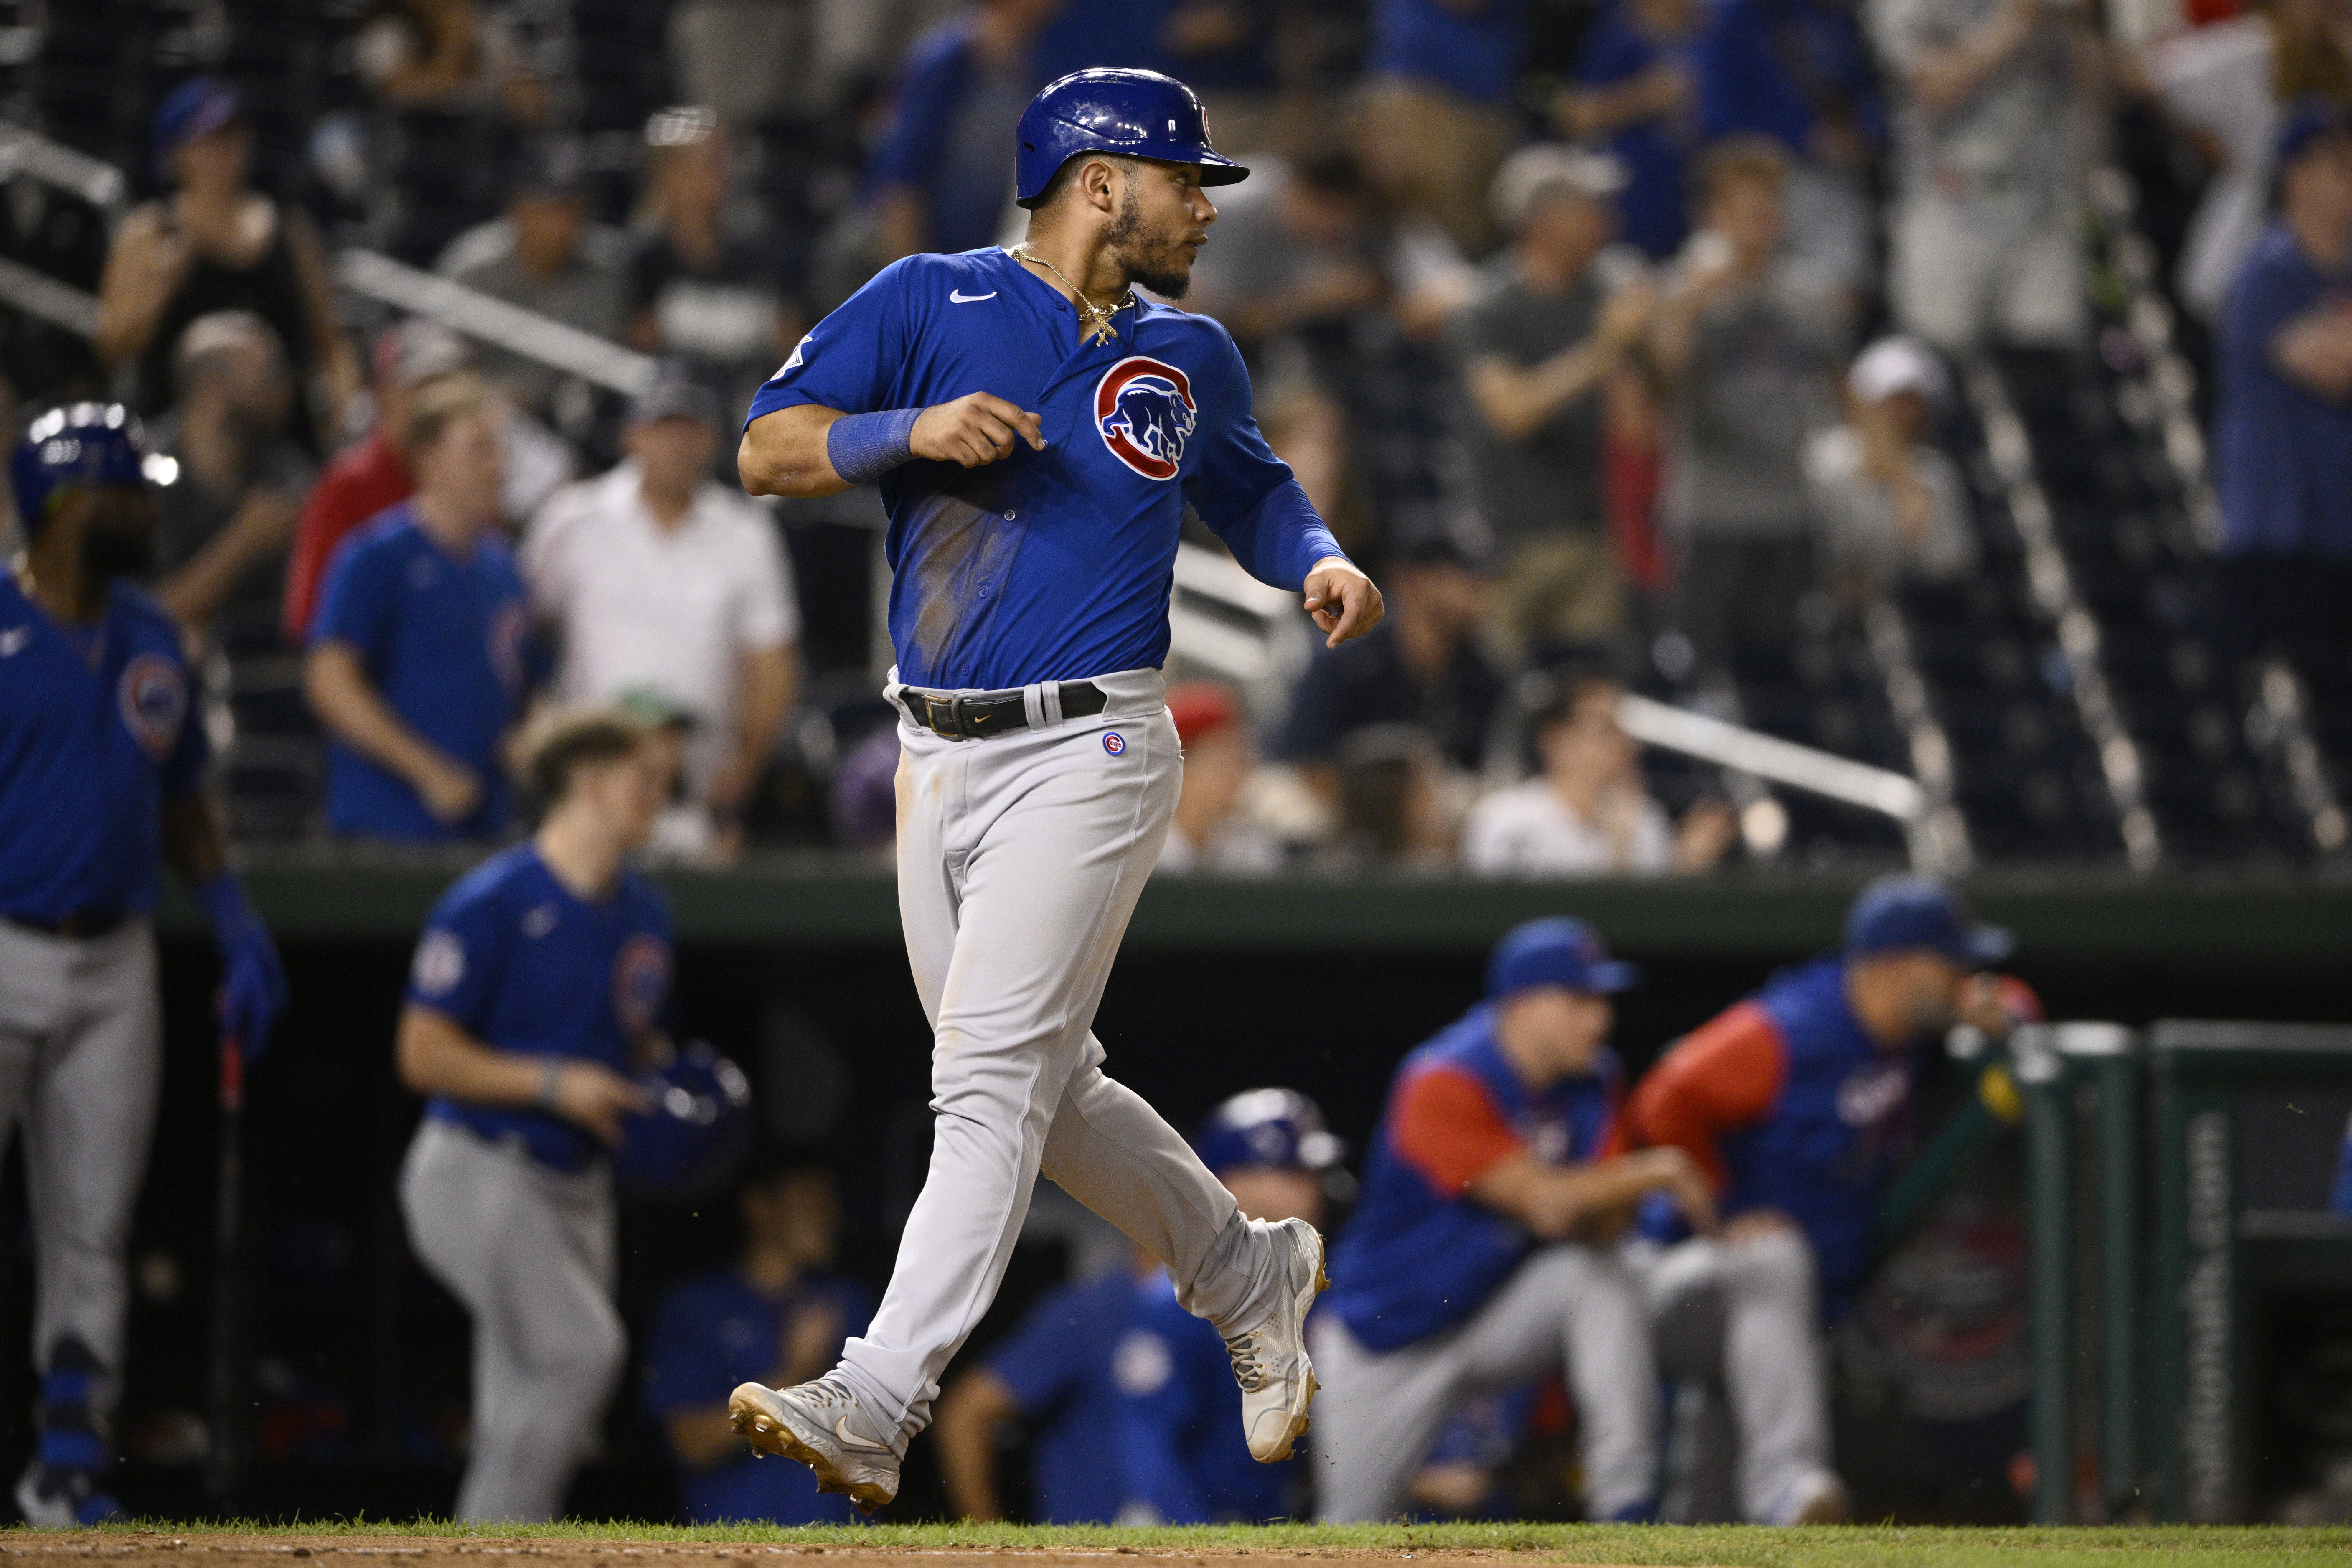 Cubs' Willson Contreras tries to keep focus on baseball while mind on  brother - Chicago Sun-Times